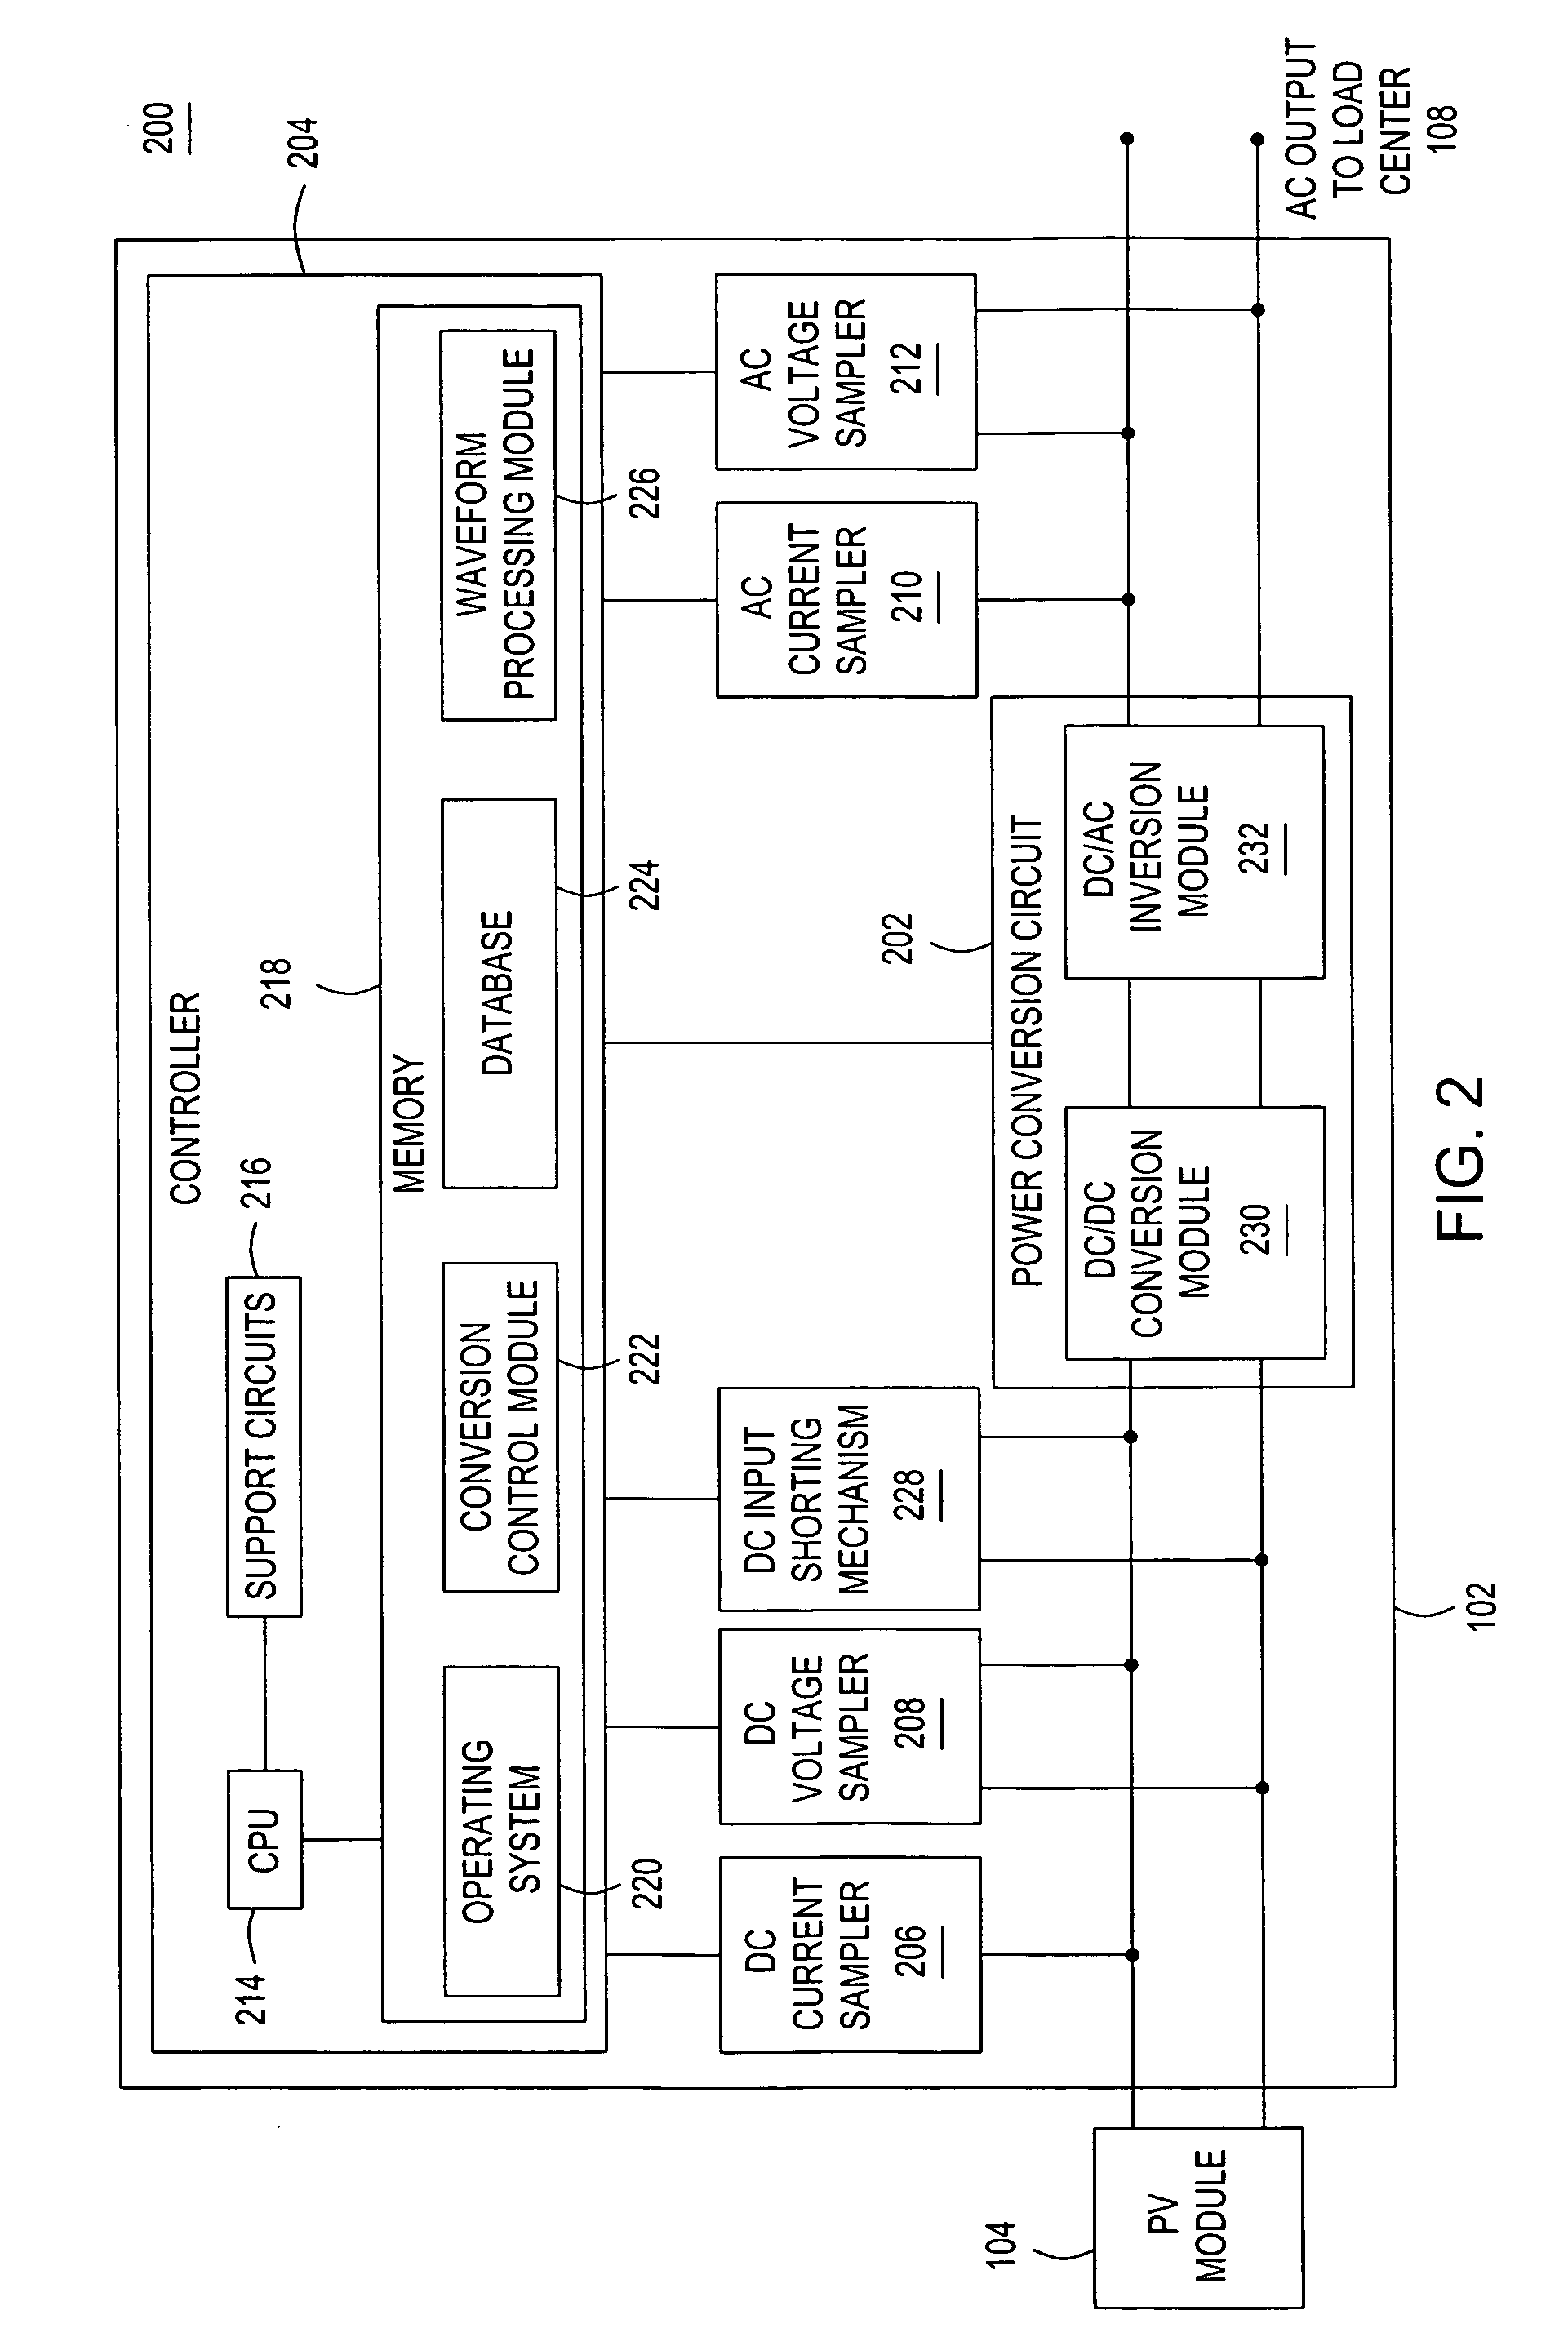 Method and apparatus for detection and control of dc arc faults